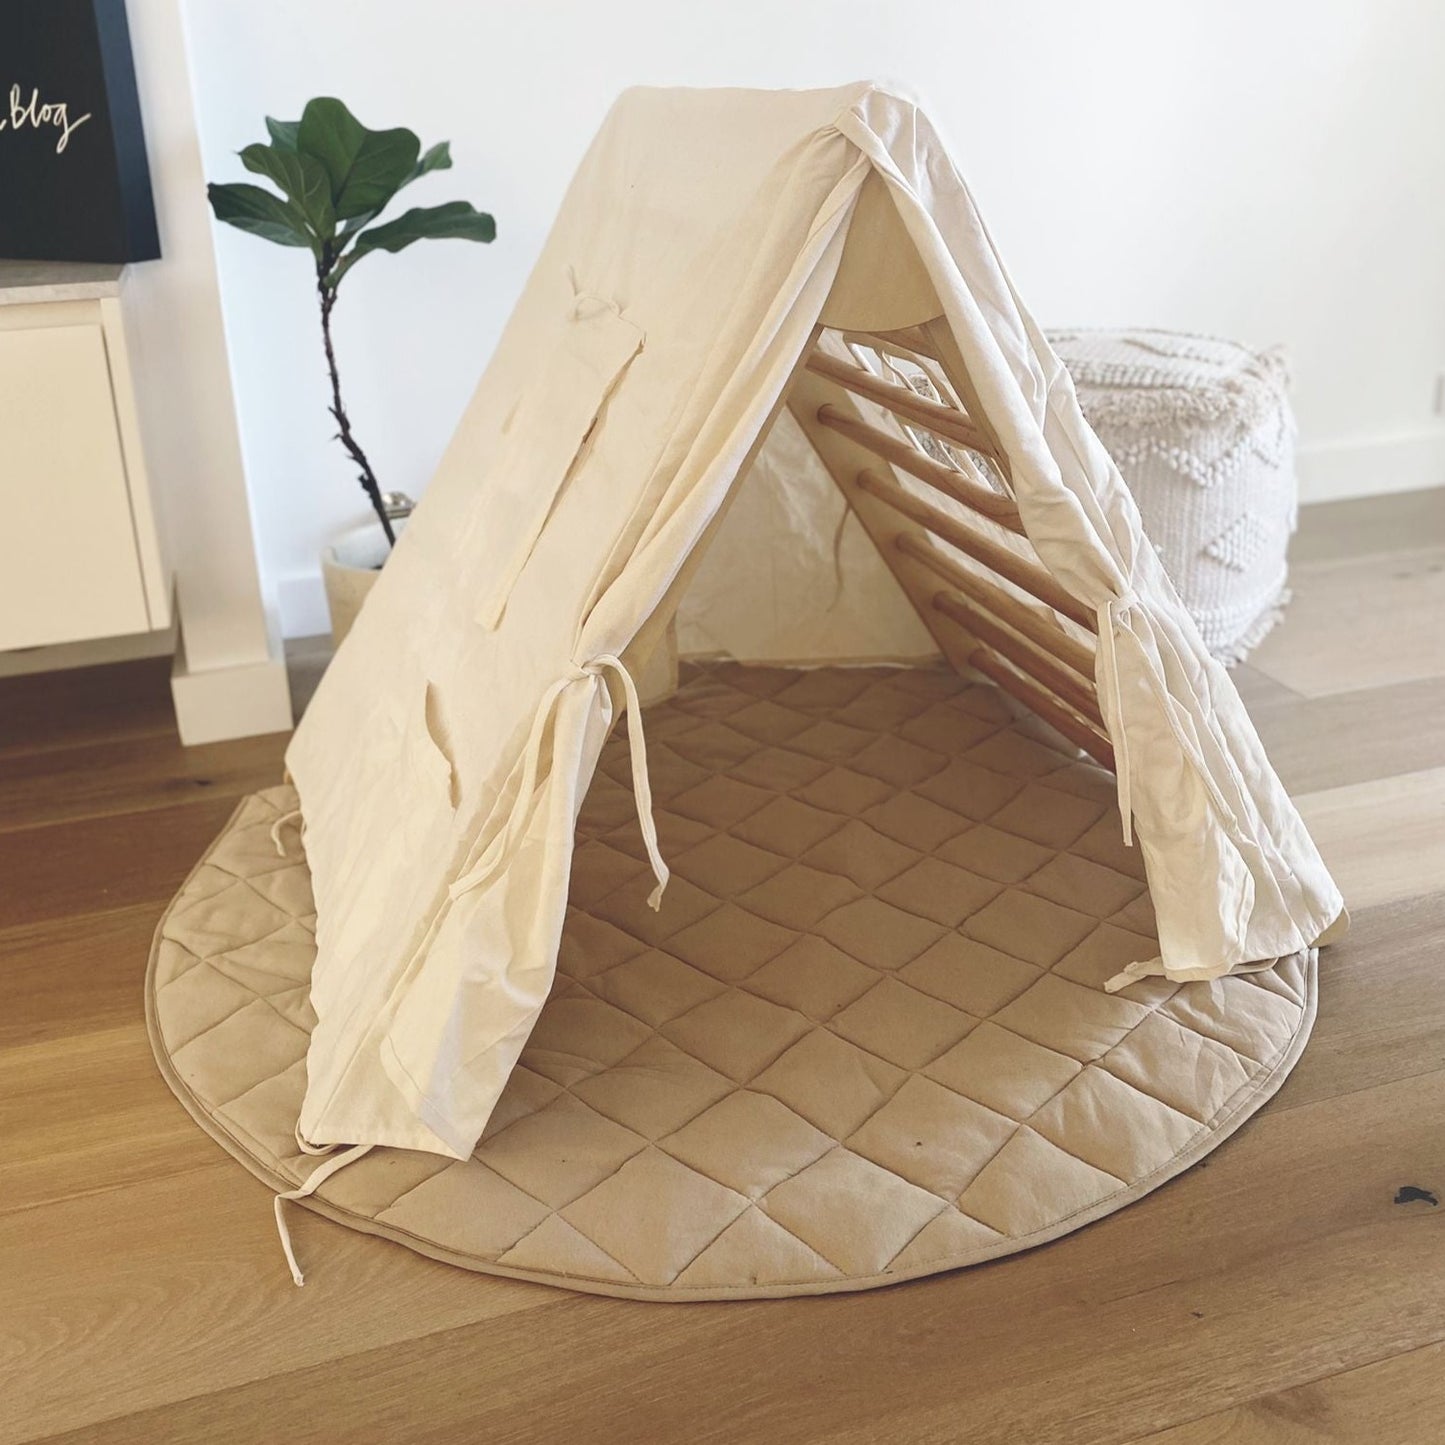 Pikler Triangle and Tent Bundle